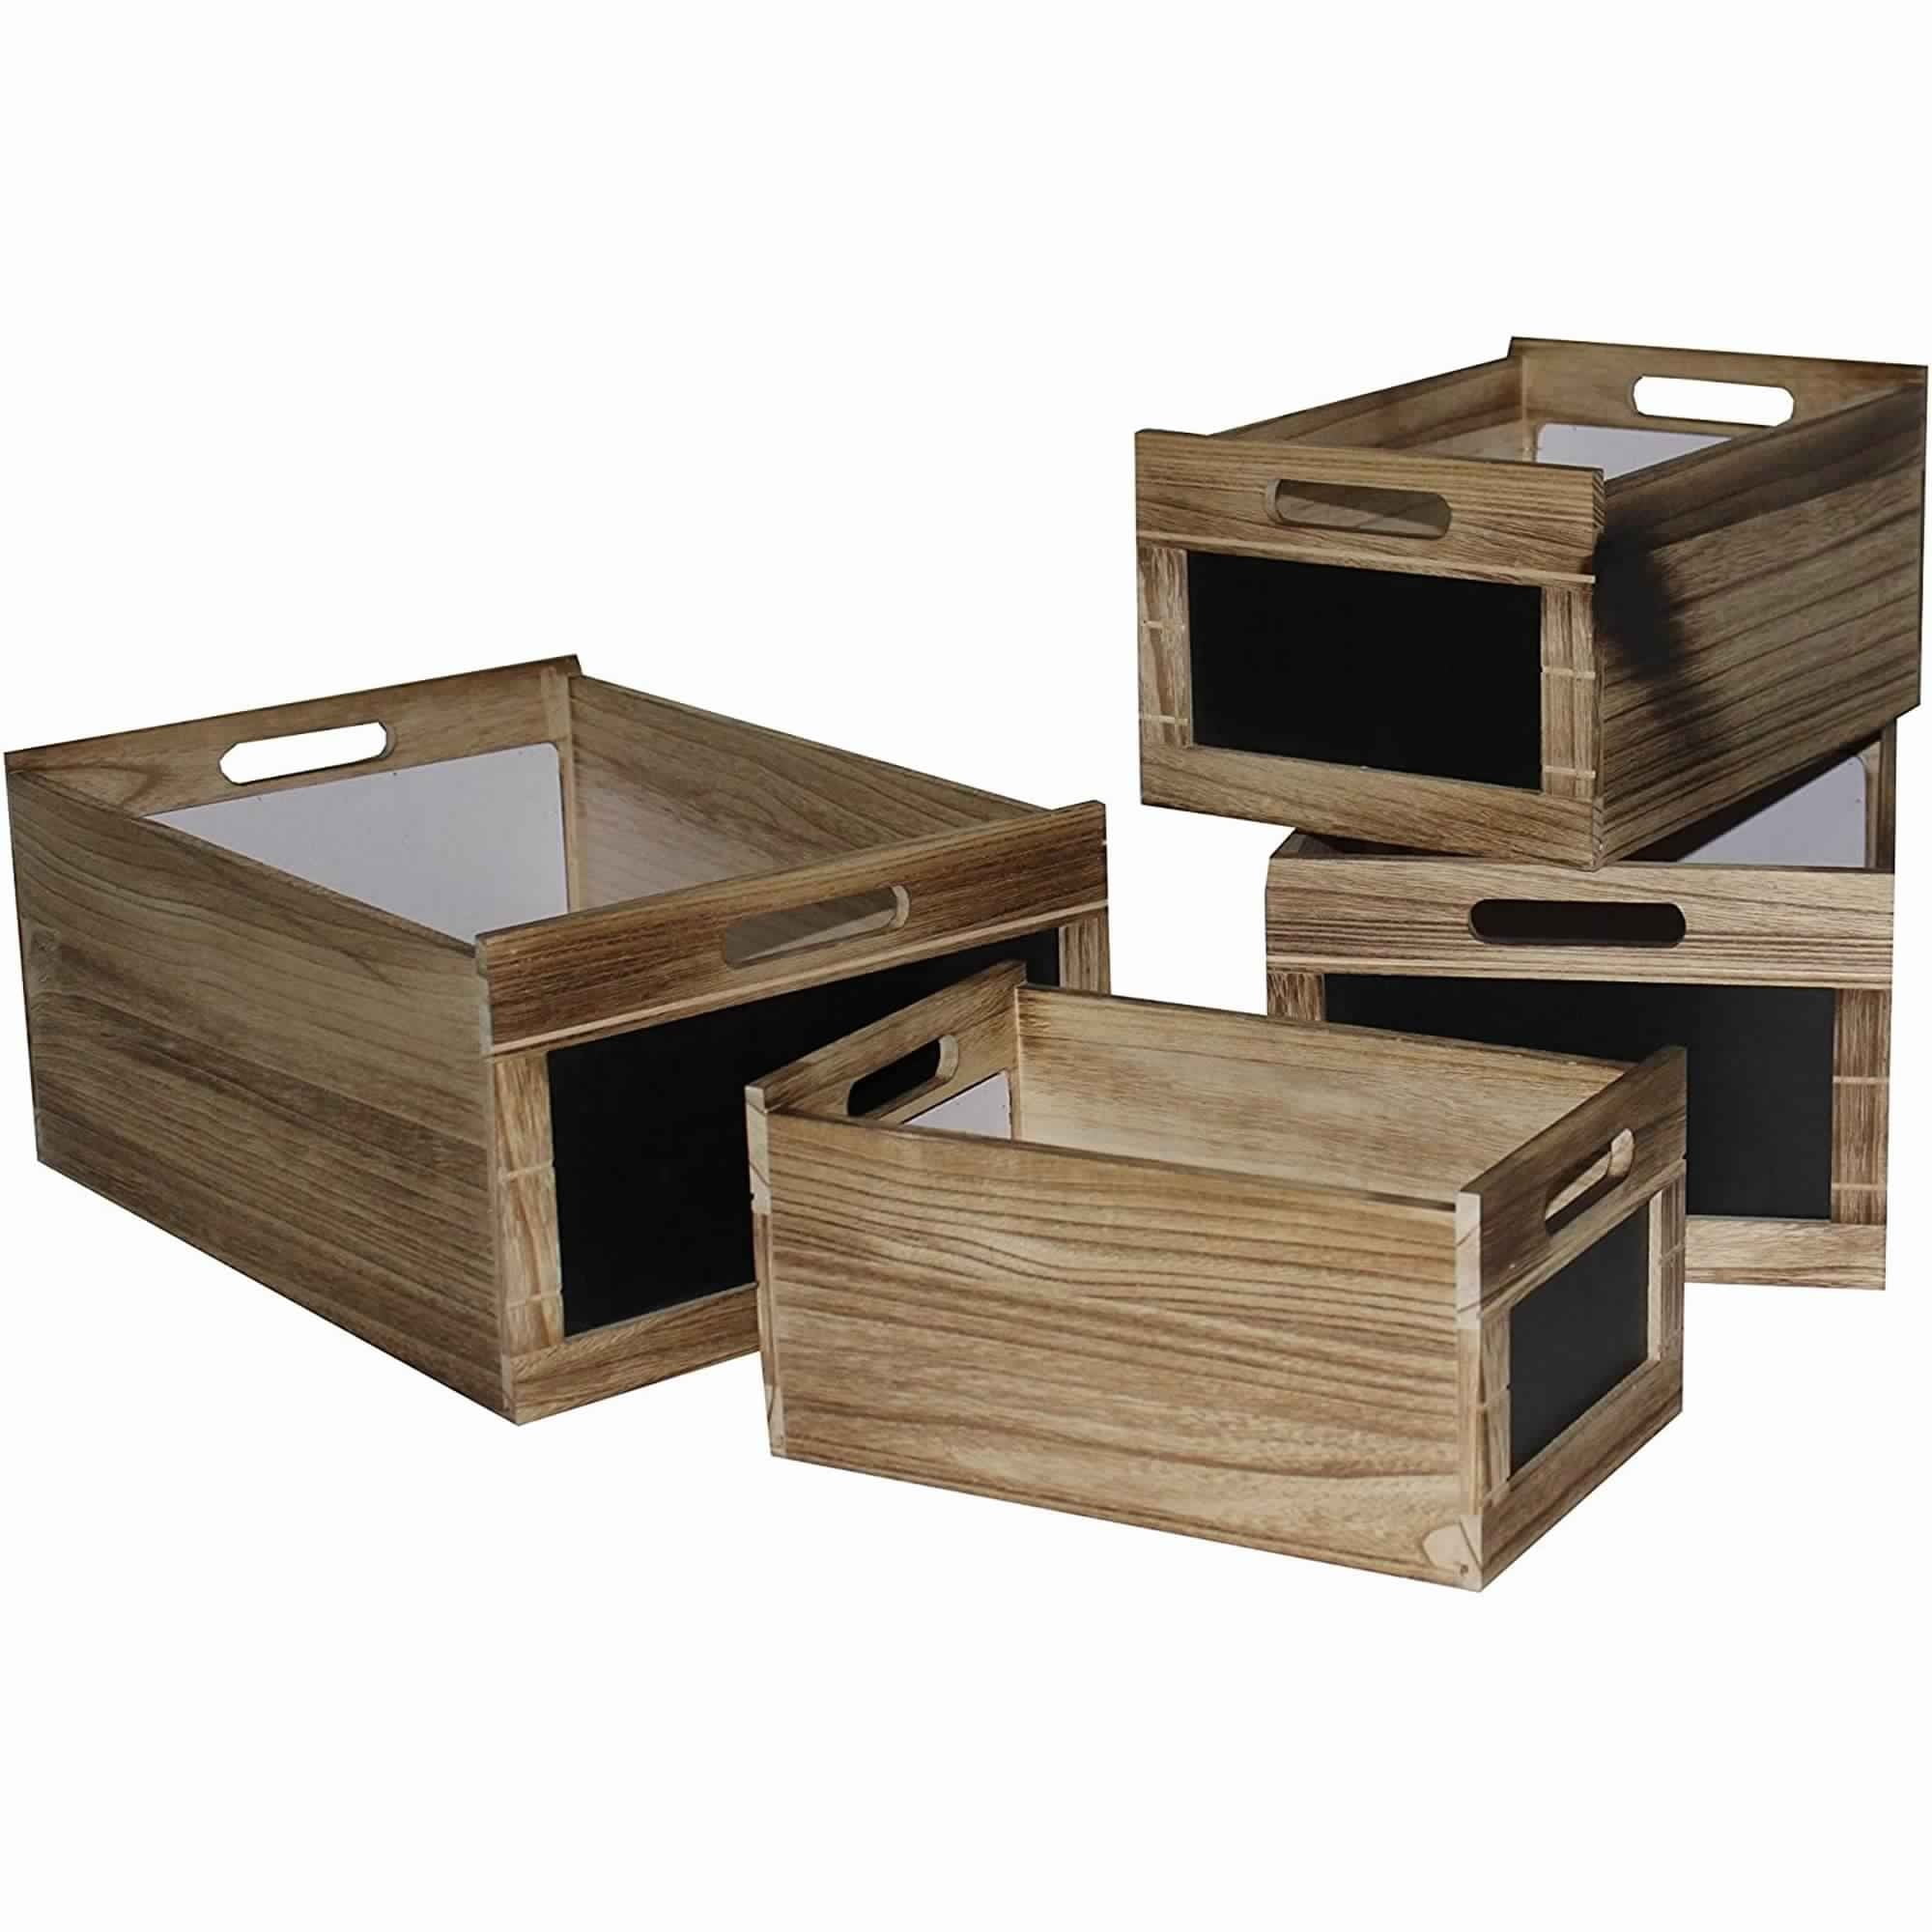 Set of 3 MyGift Nesting Rustic Brown Wood Storage & Accent Crates